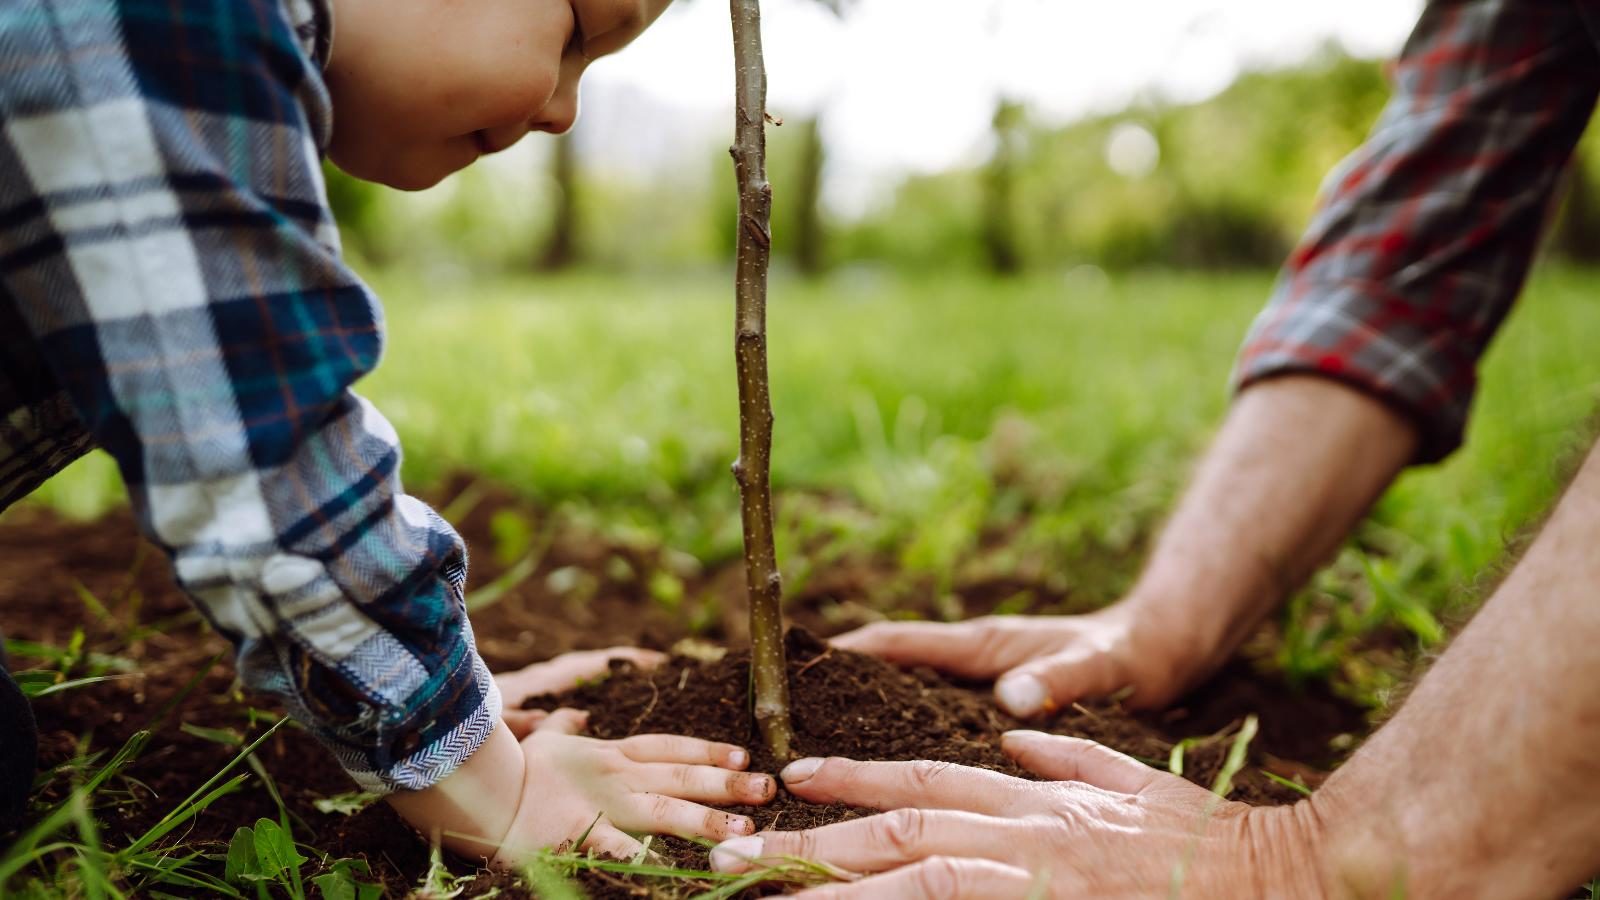 Child planting a tree with his father.